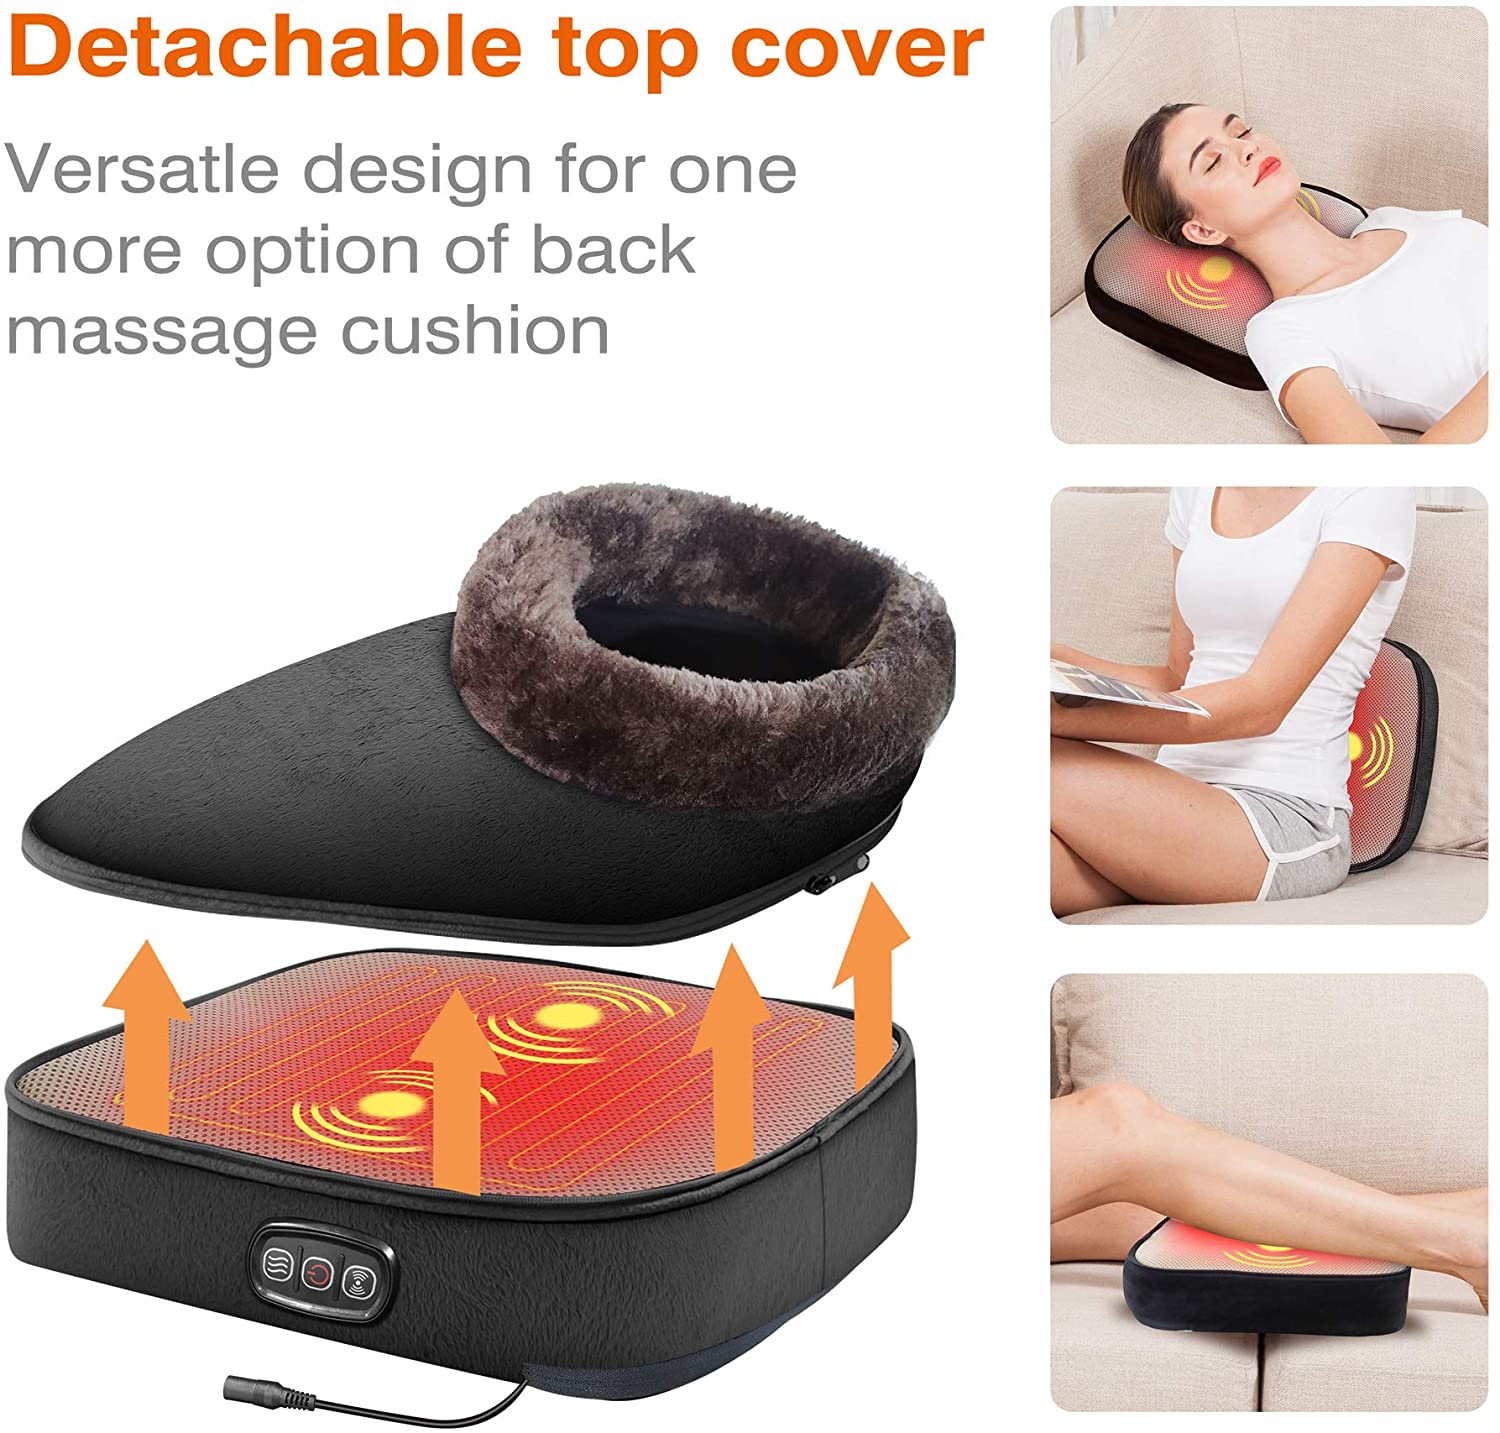 snailax-infrared-vibration-footback-massager-5699-to-relieve-stress-2021-6-14